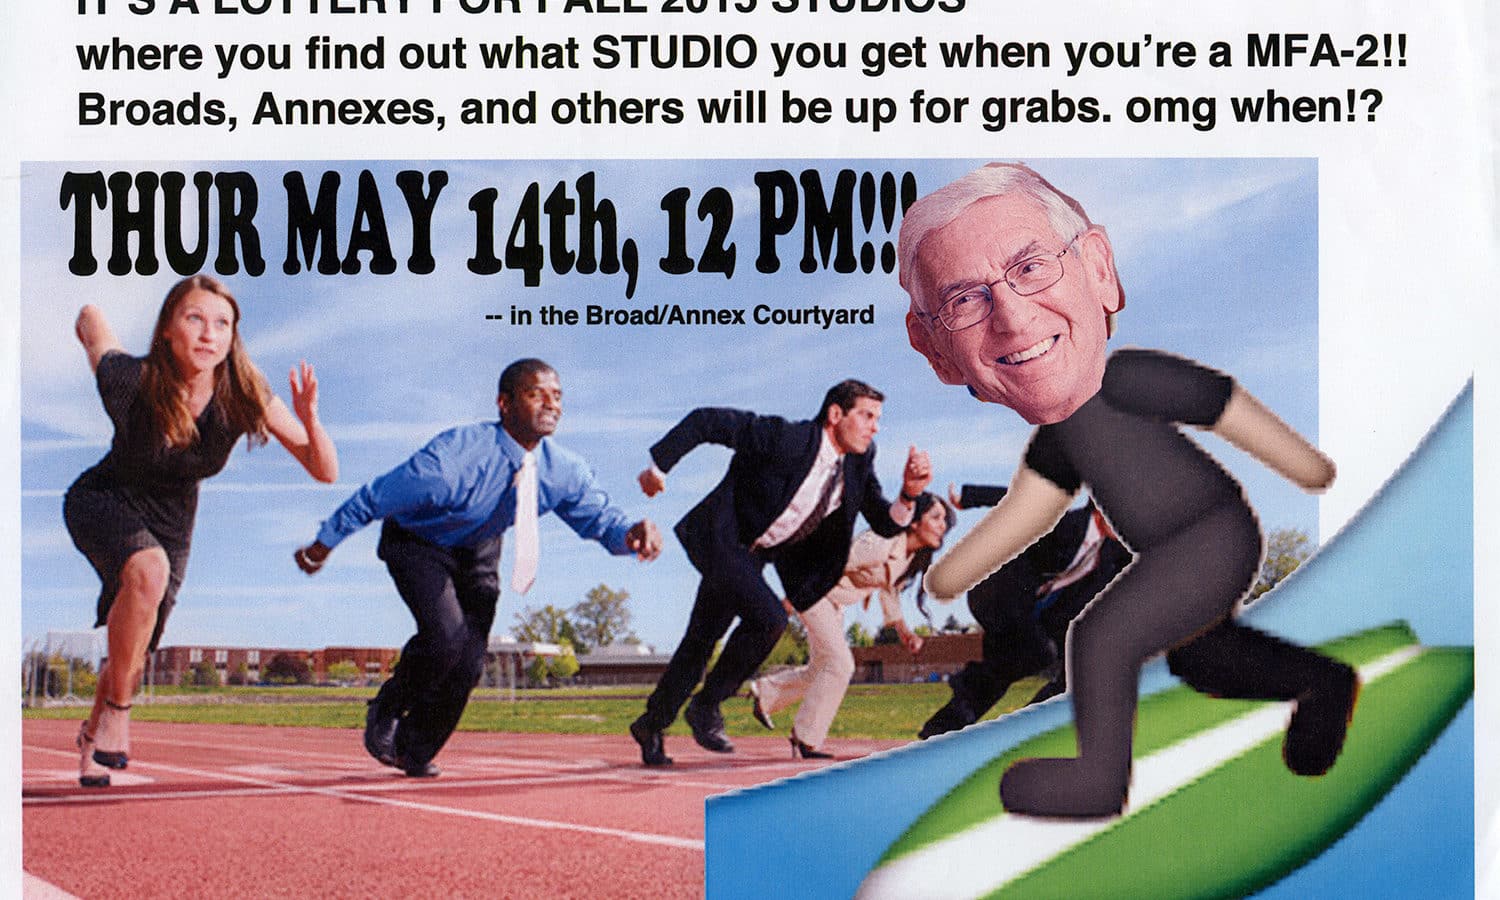 Top text: 'Cowabunga, MFA-1s in Art!' Stock image of people in professional attire at the starting line of a race track, and an emoji surfer with Eli Broad's face superimposed.